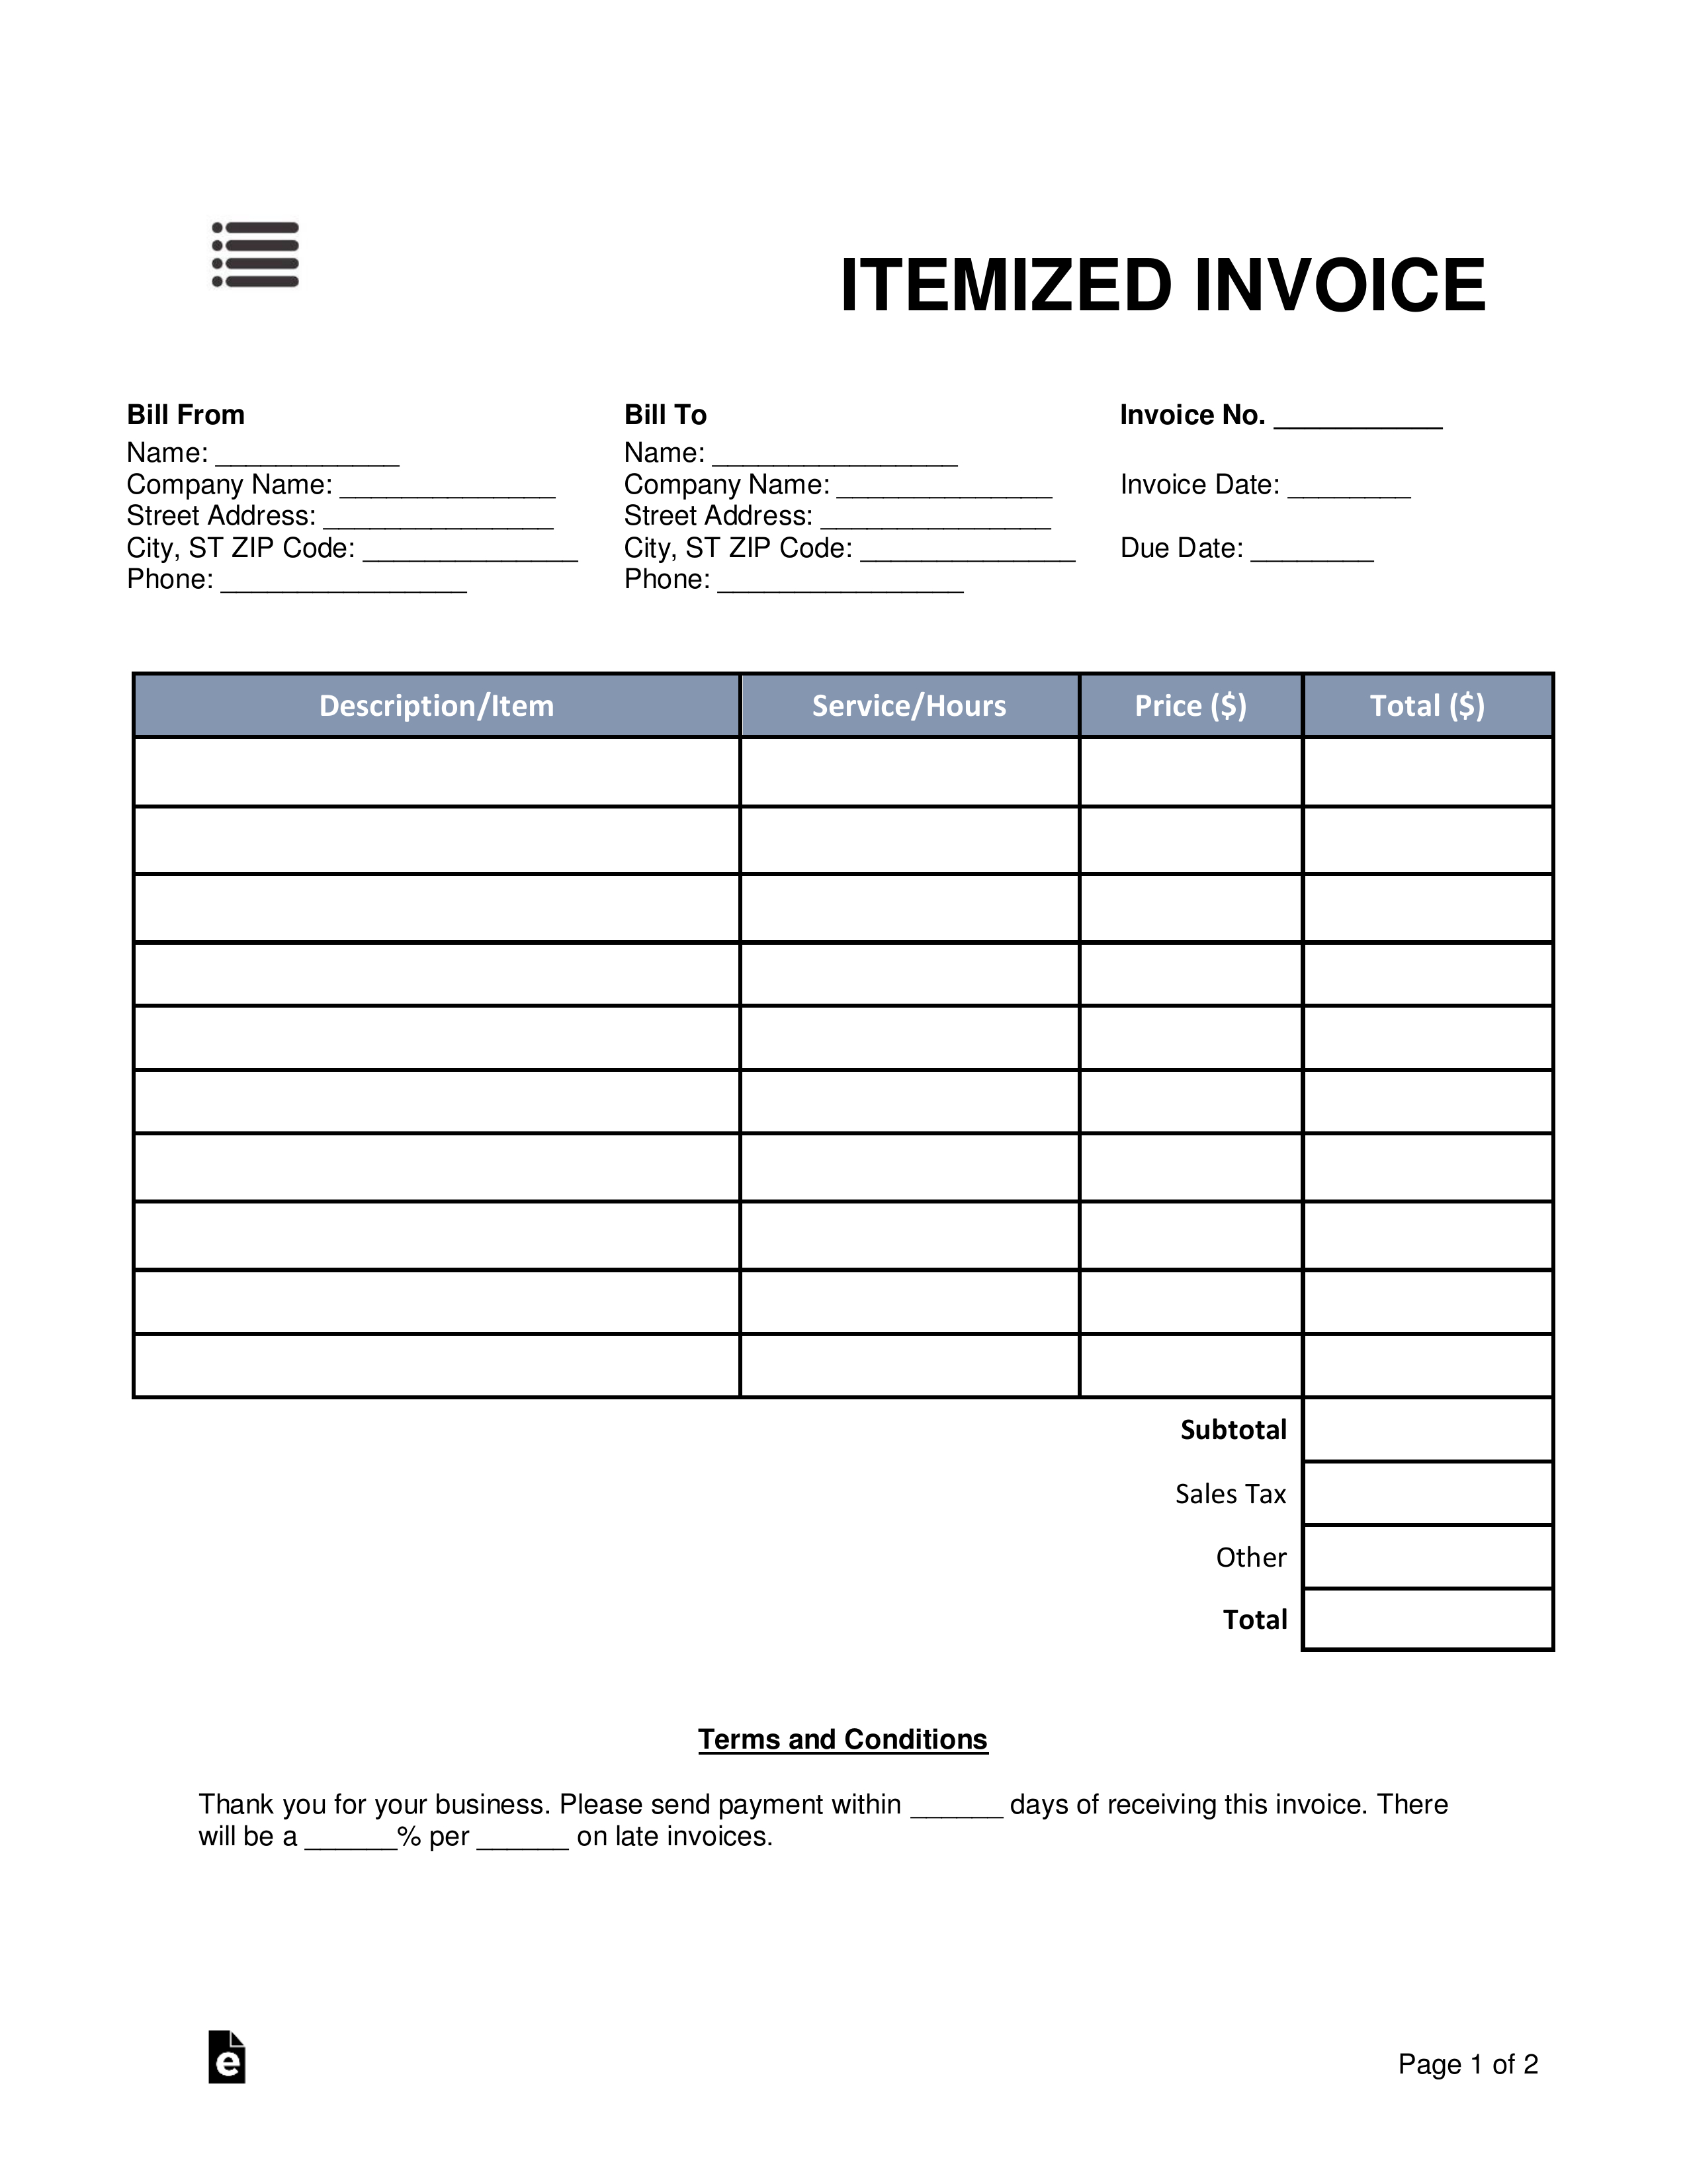 Free Itemized Invoice Template - Word | Pdf | Eforms – Free within Itemized Invoice Template